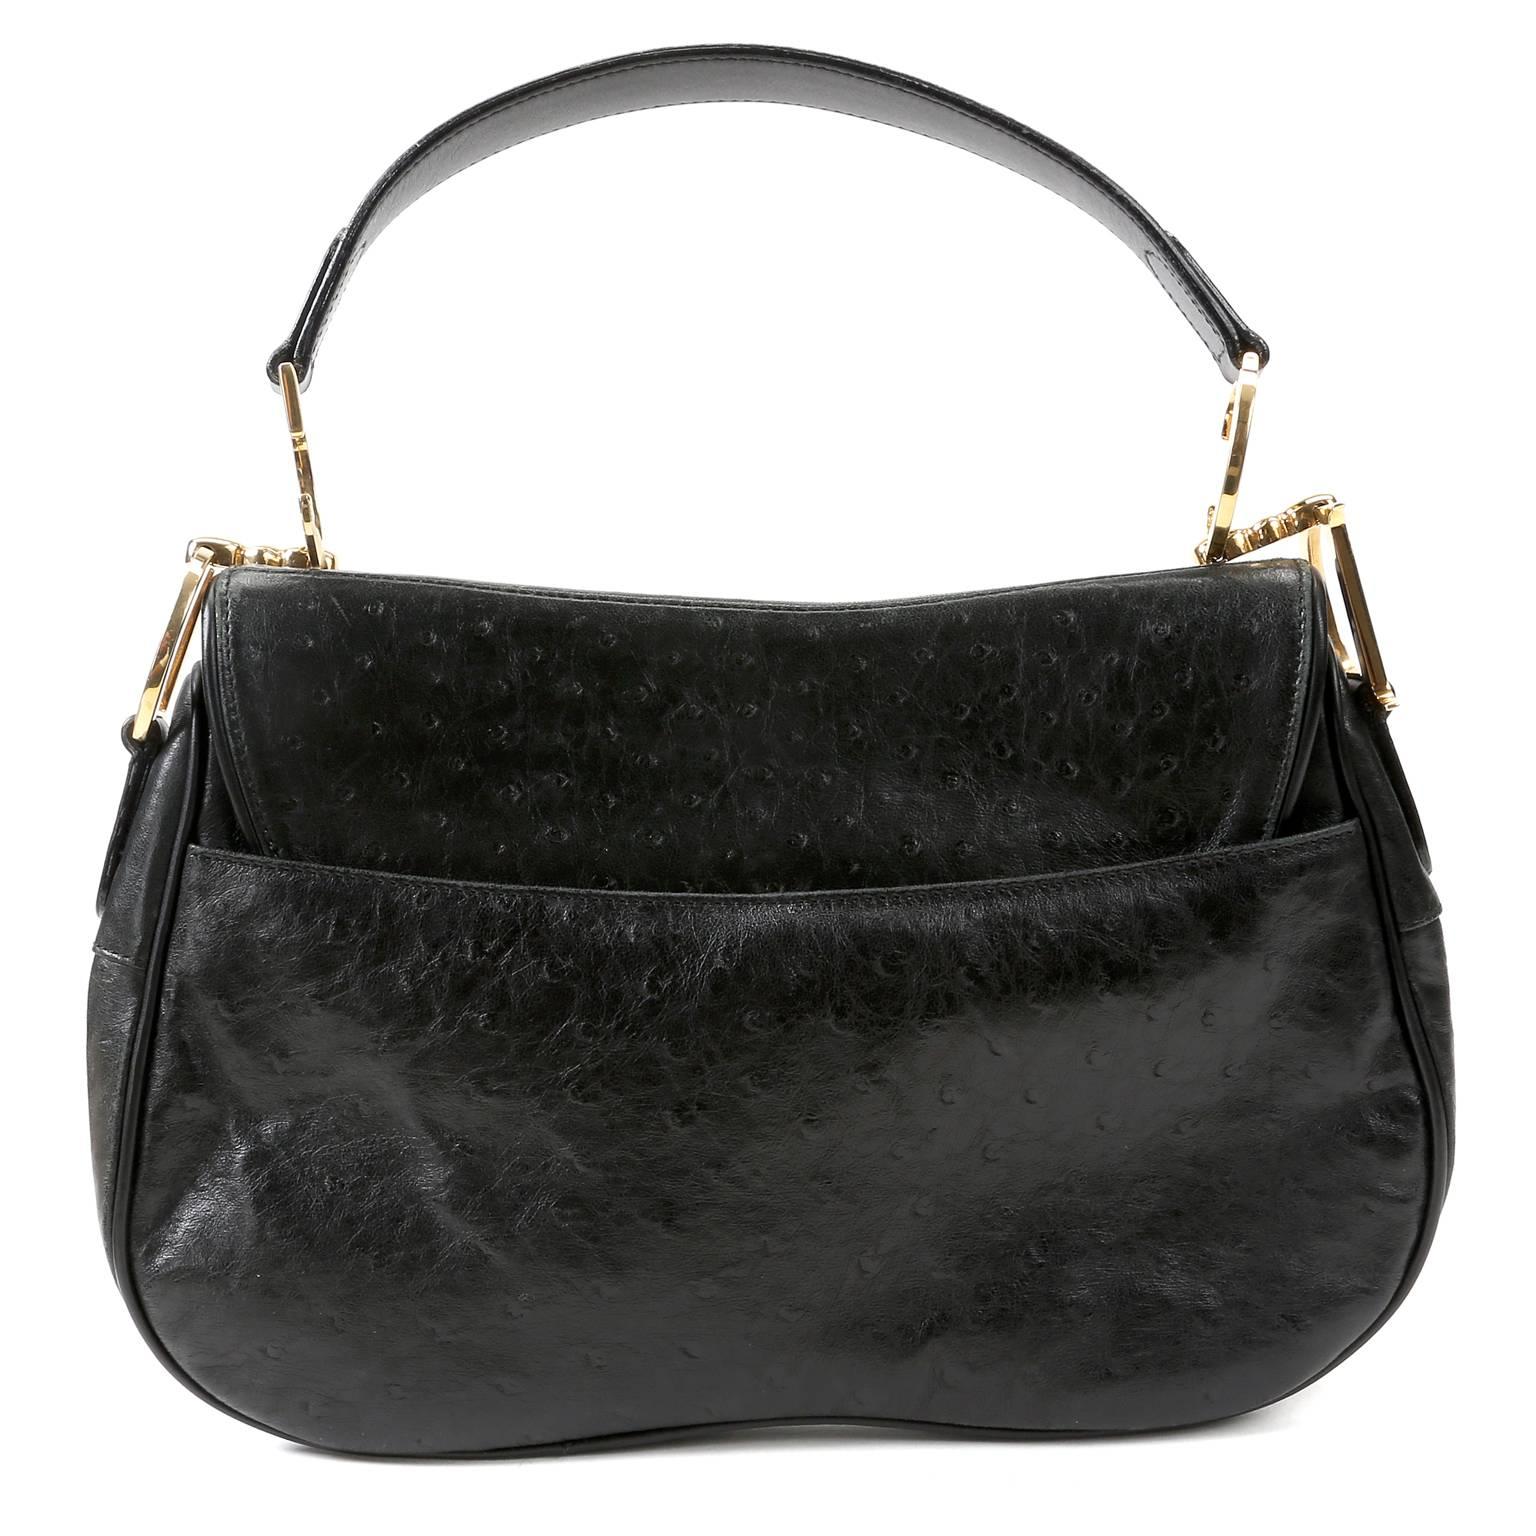 Christian Dior Black Ostrich Double Saddle Bag- MINT
  This is the larger version of the iconic style made famous by Sarah Jessica Parker’s character on Sex in the City. 
Black ostrich skin construction is both rare and beautiful.  Ostrich skin is